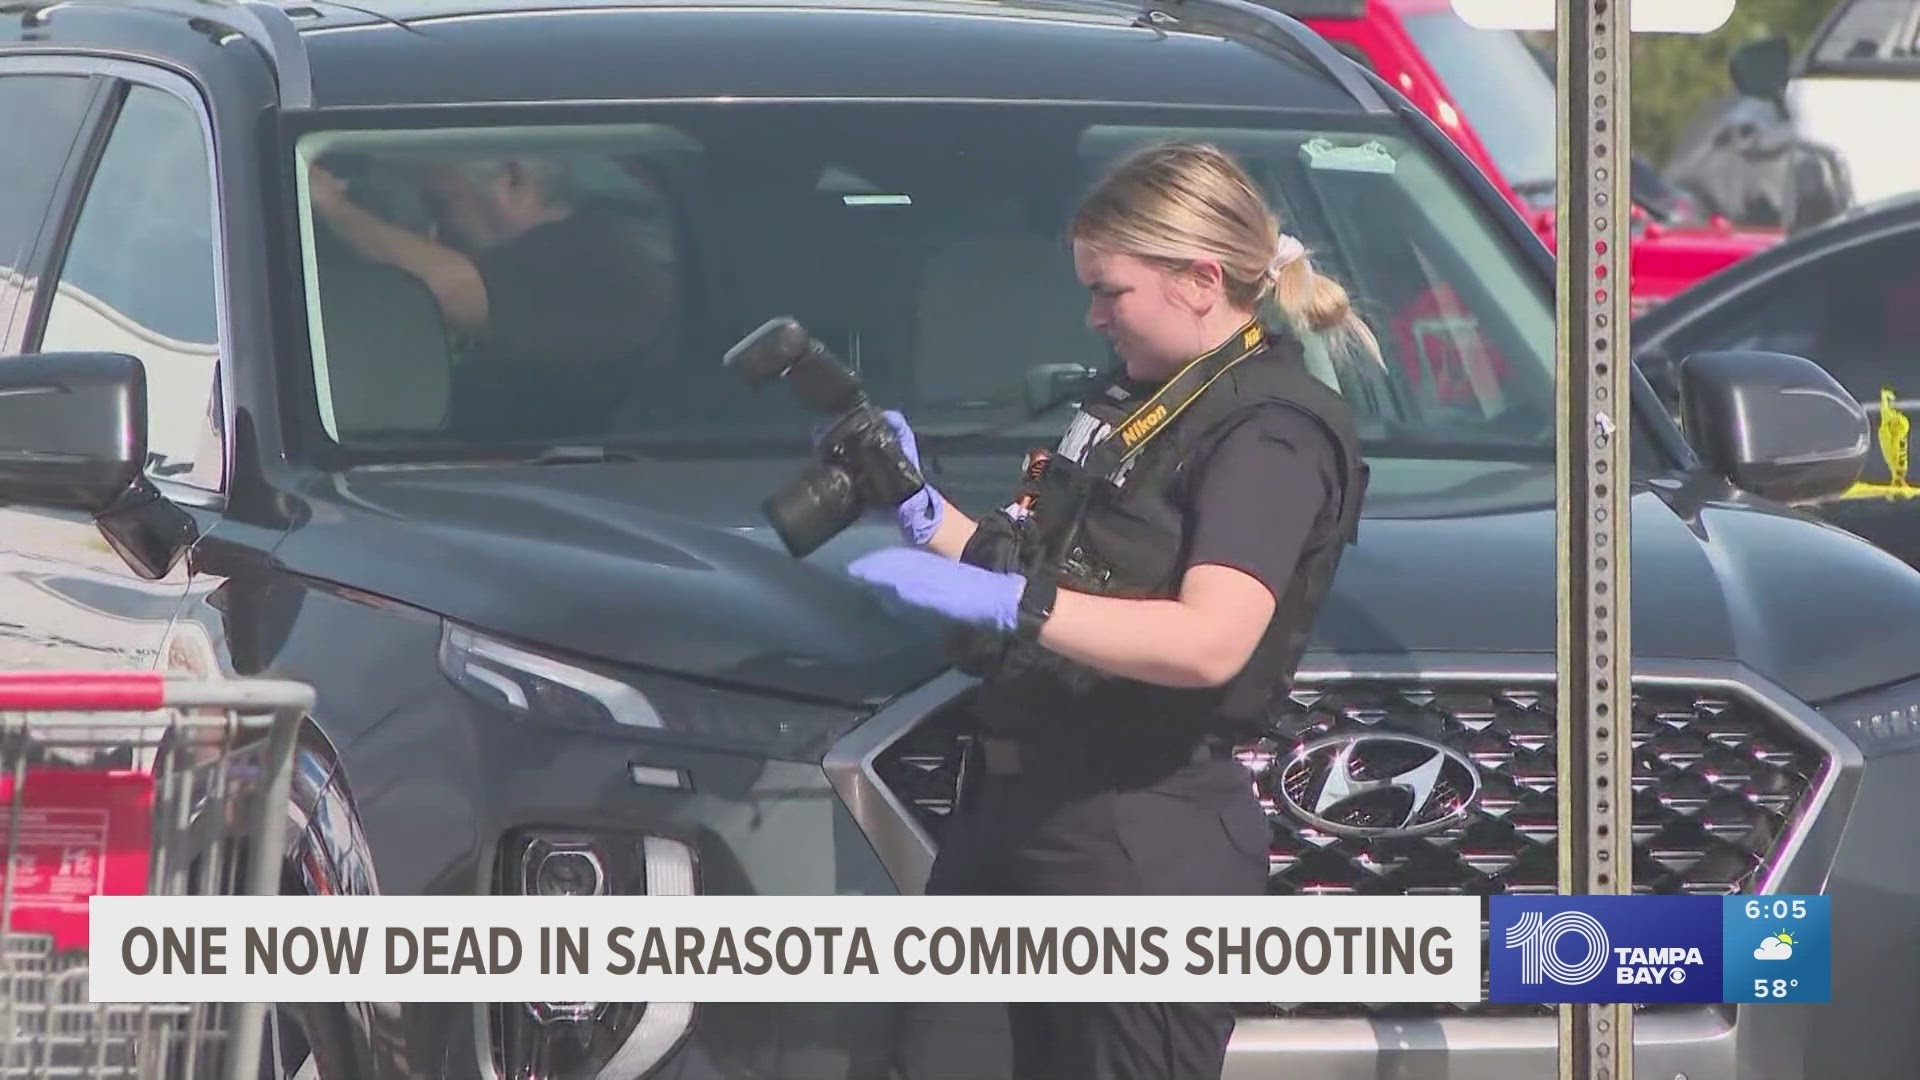 Sarasota police are continuing to look for witnesses as the victim of a Friday shooting died.